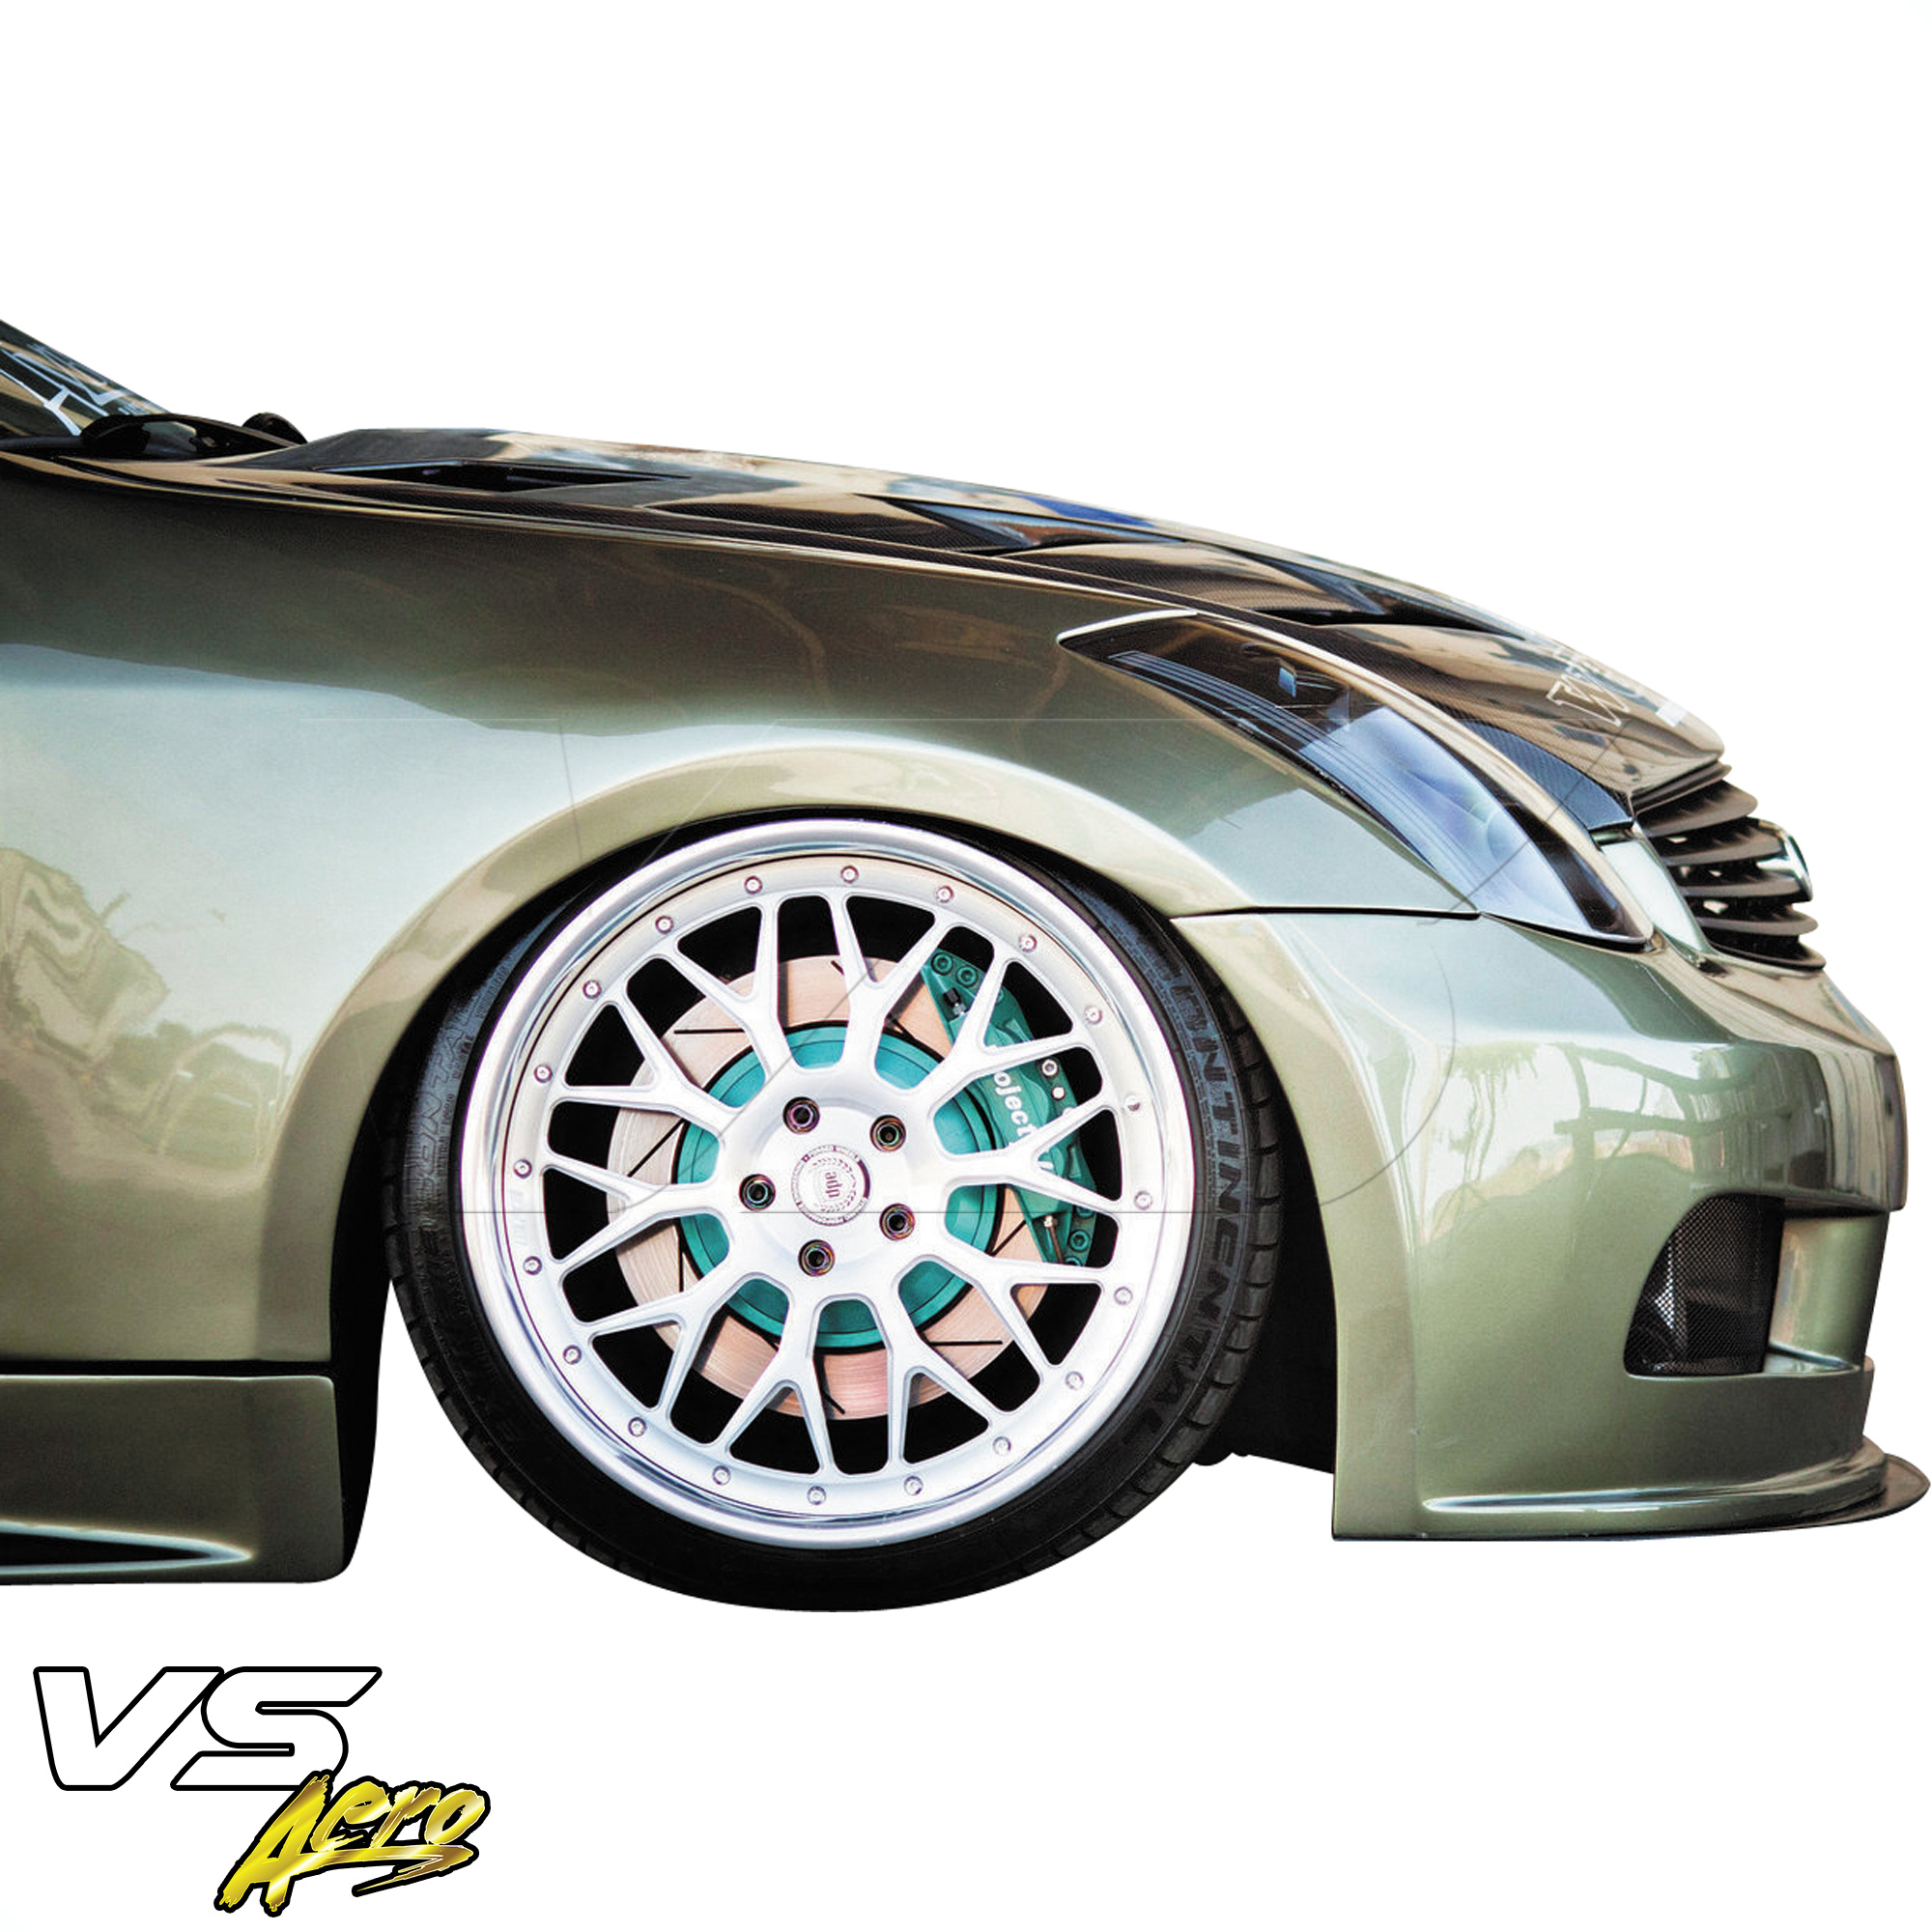 VSaero FRP APBR Wide Body Fenders (front) > Infiniti G35 Coupe 2003-2006 > 2dr Coupe - Image 14